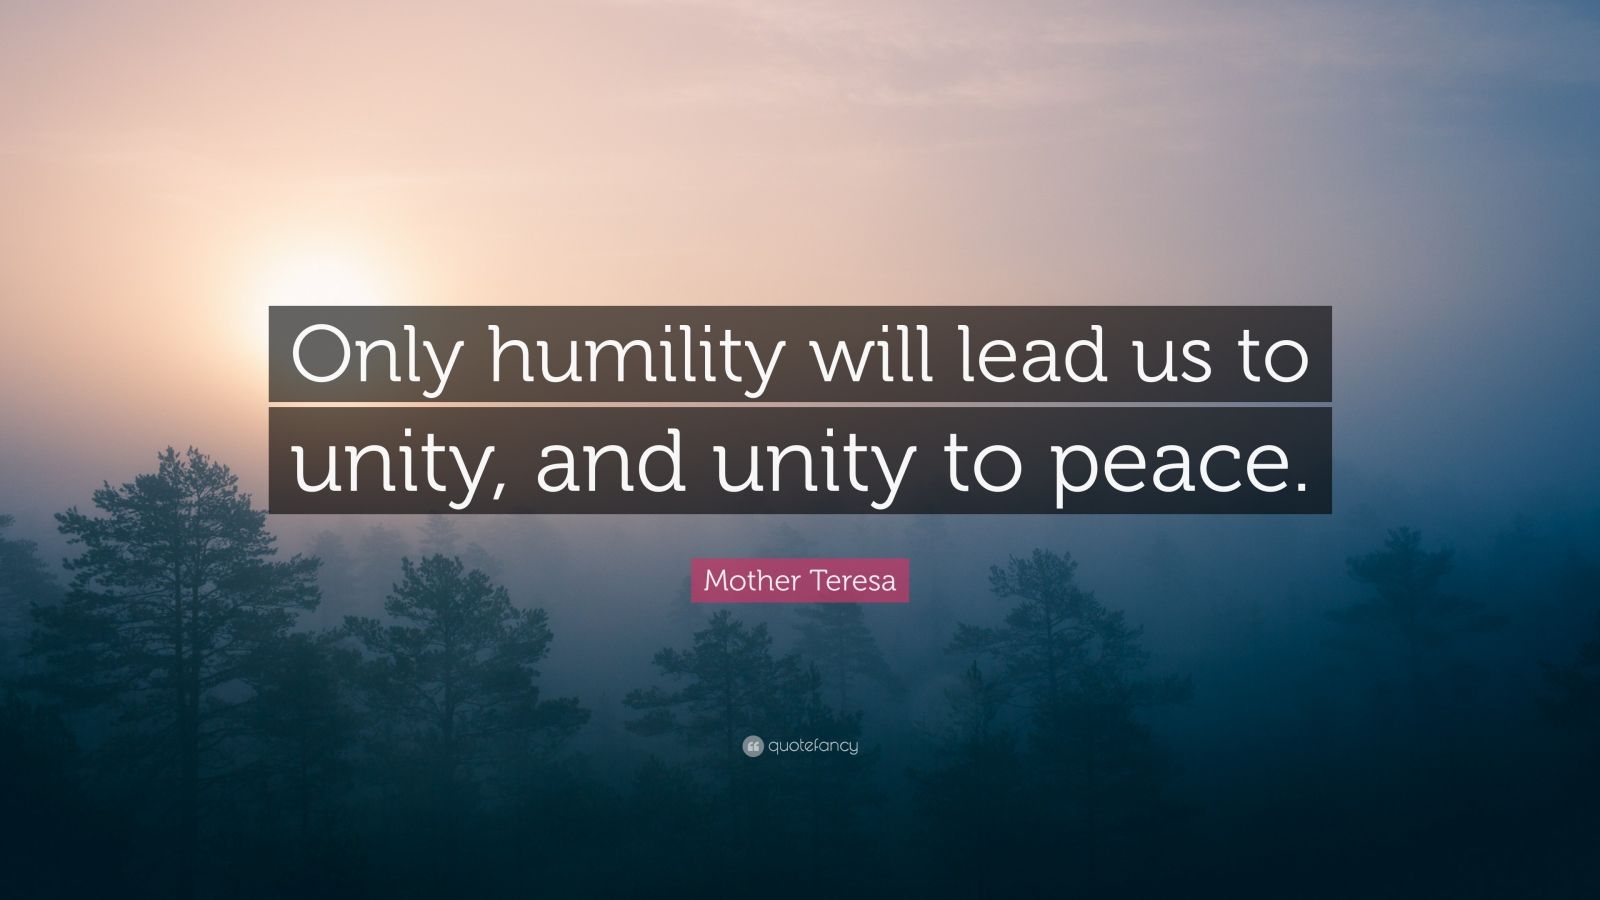 Mother Teresa Quote: “Only humility will lead us to unity, and unity to